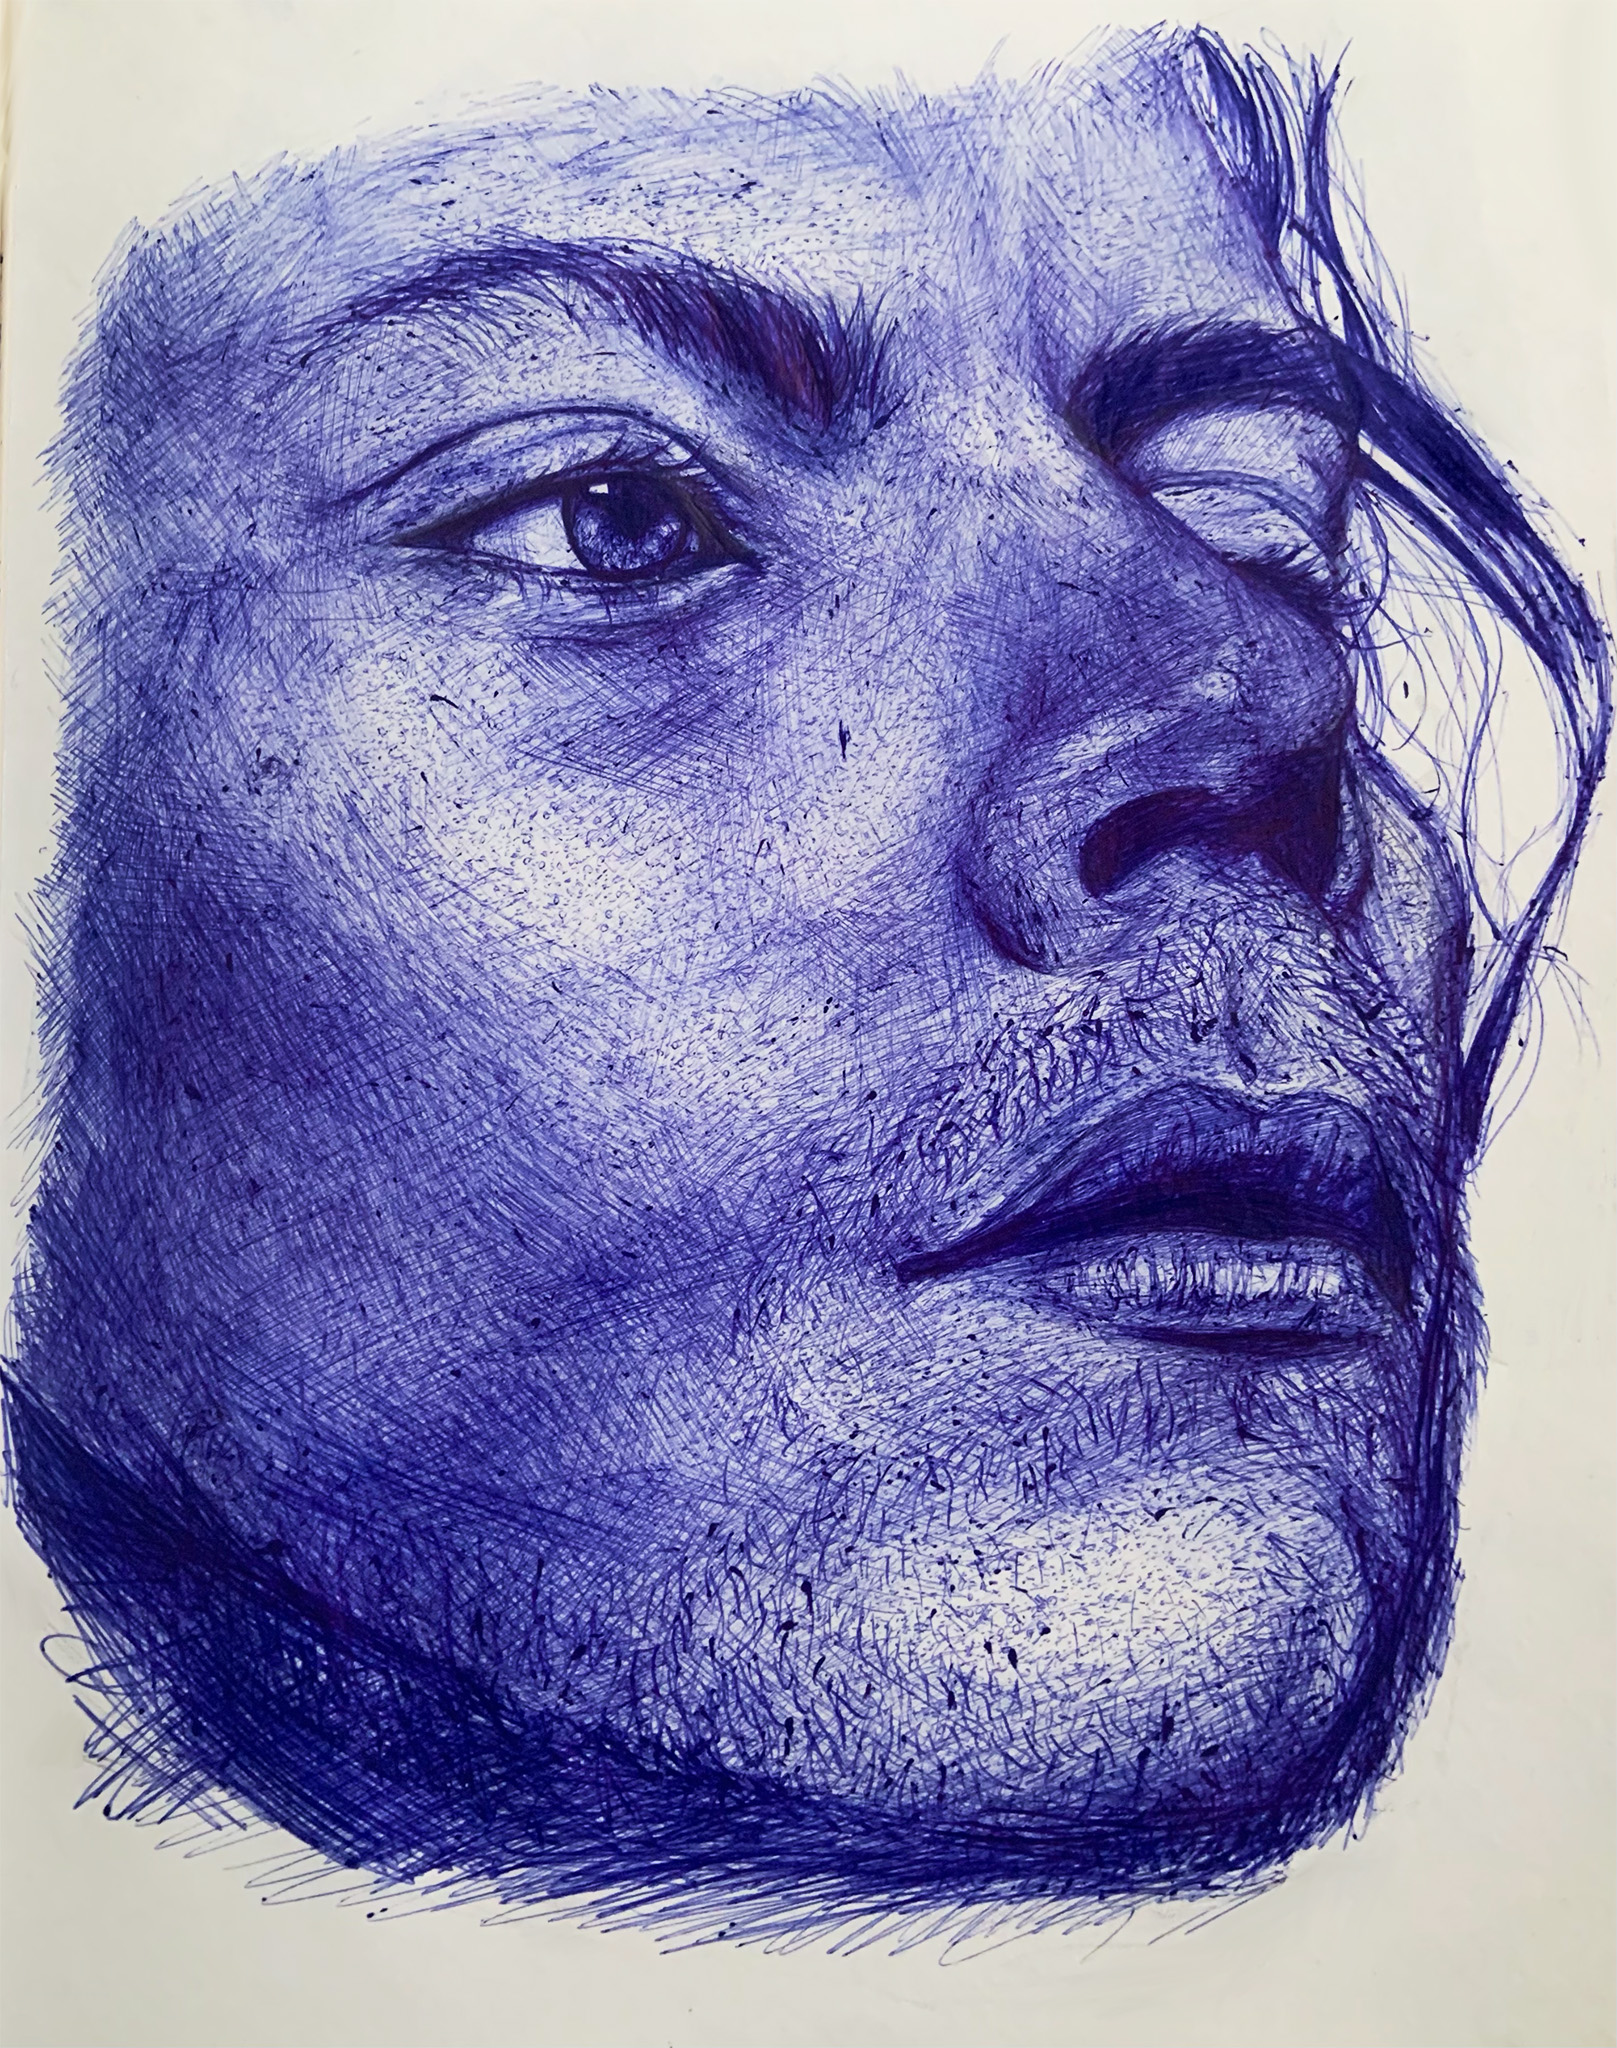 Realistic portrait of a man's face done in blue pen ink.